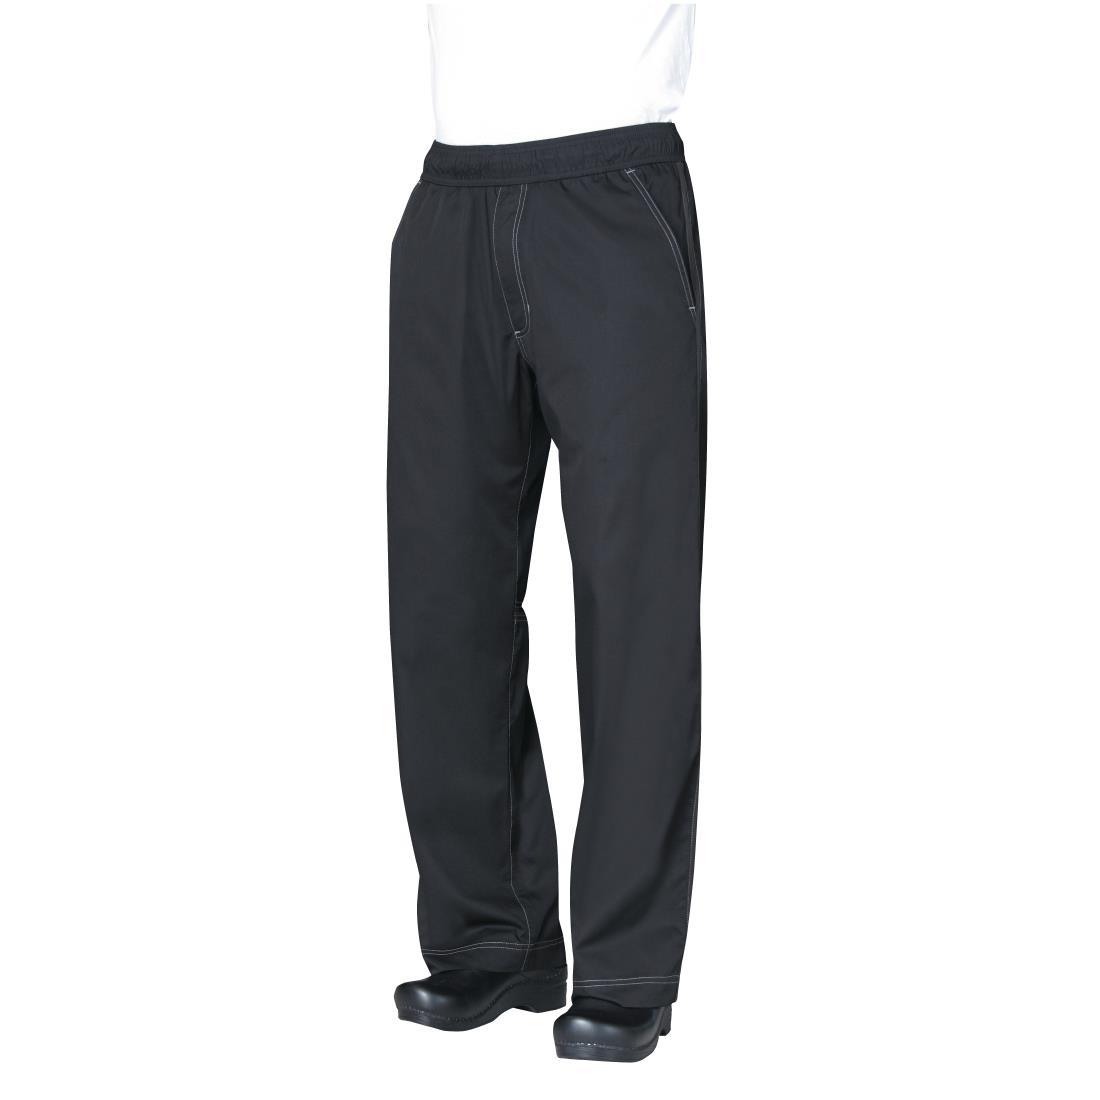 Chef Works Unisex Cool Vent Baggy Chefs Trousers Black M - B187-M  - 1